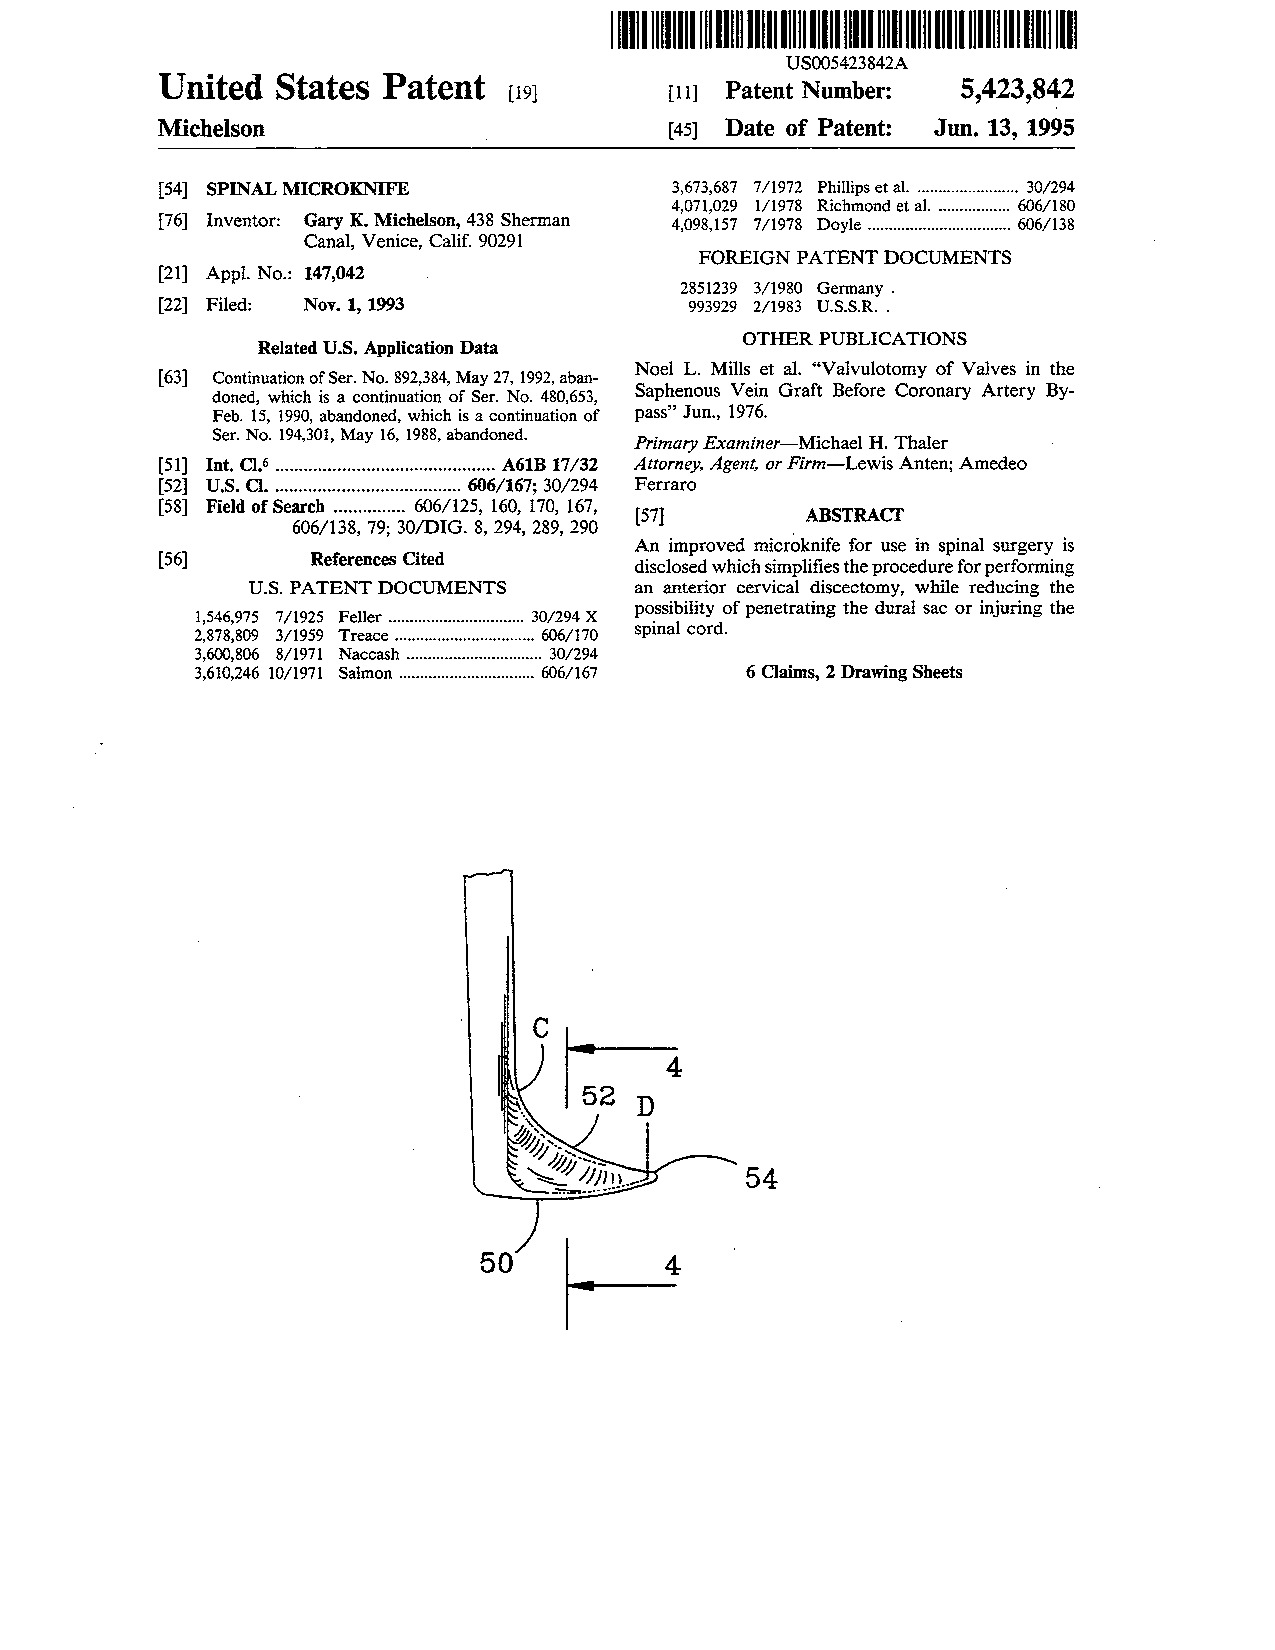 Spinal microknife - Patent 5,423,842